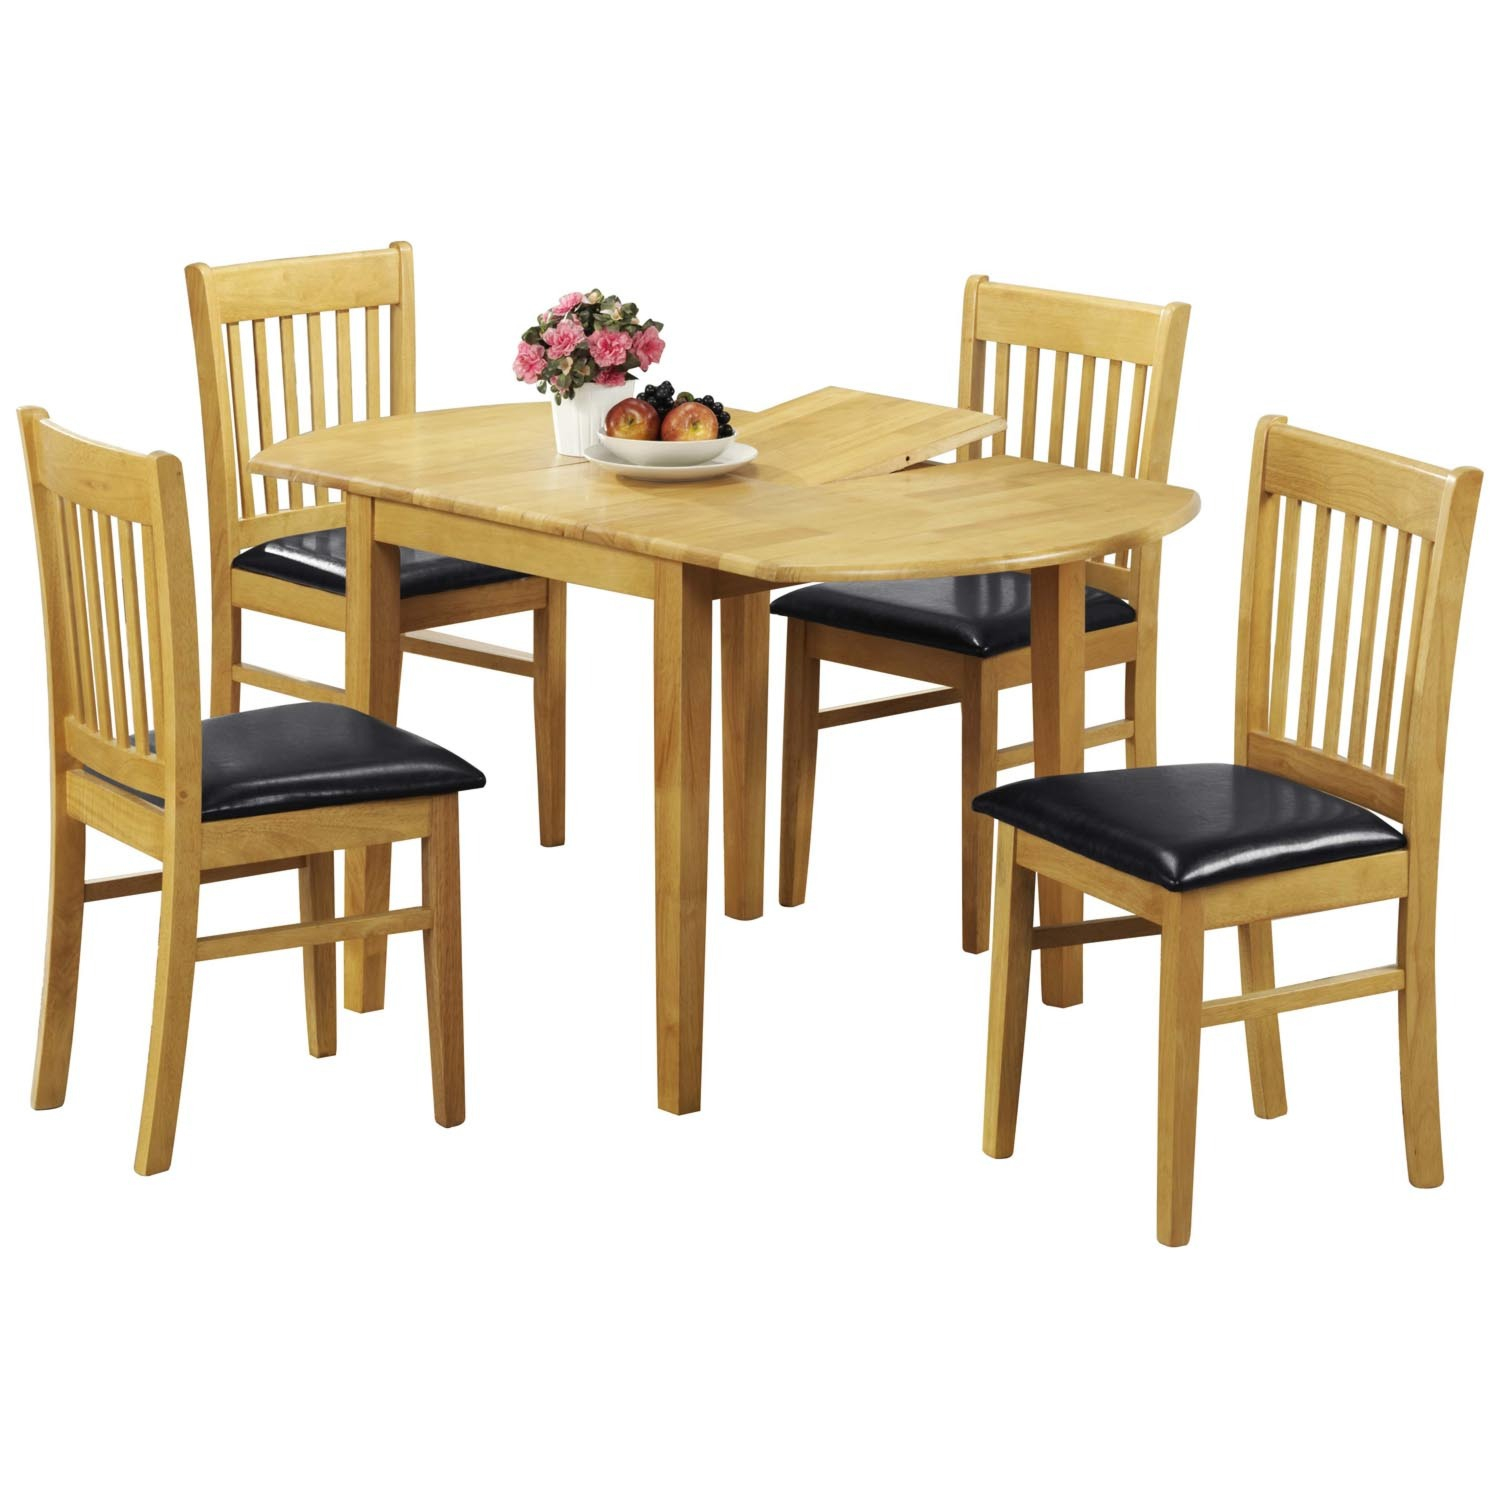 Sussex Dining Table And Four Chairs Set pertaining to sizing 1500 X 1500